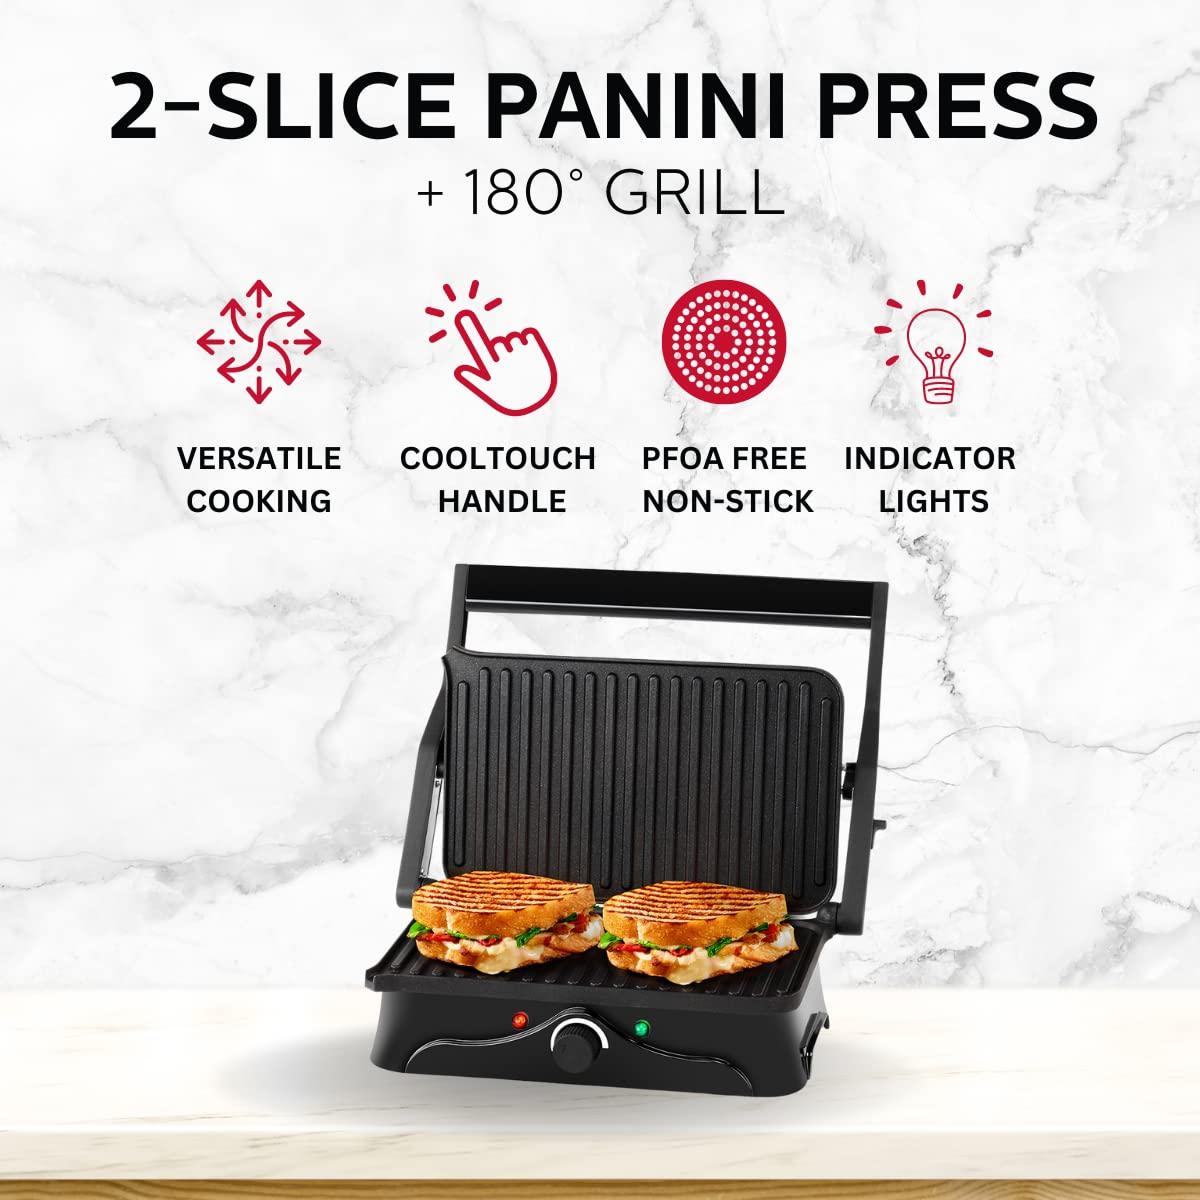 holstein housewares 2-slice panini press and grill - black/stainless steel sandwich maker with non-stick coating, temperature